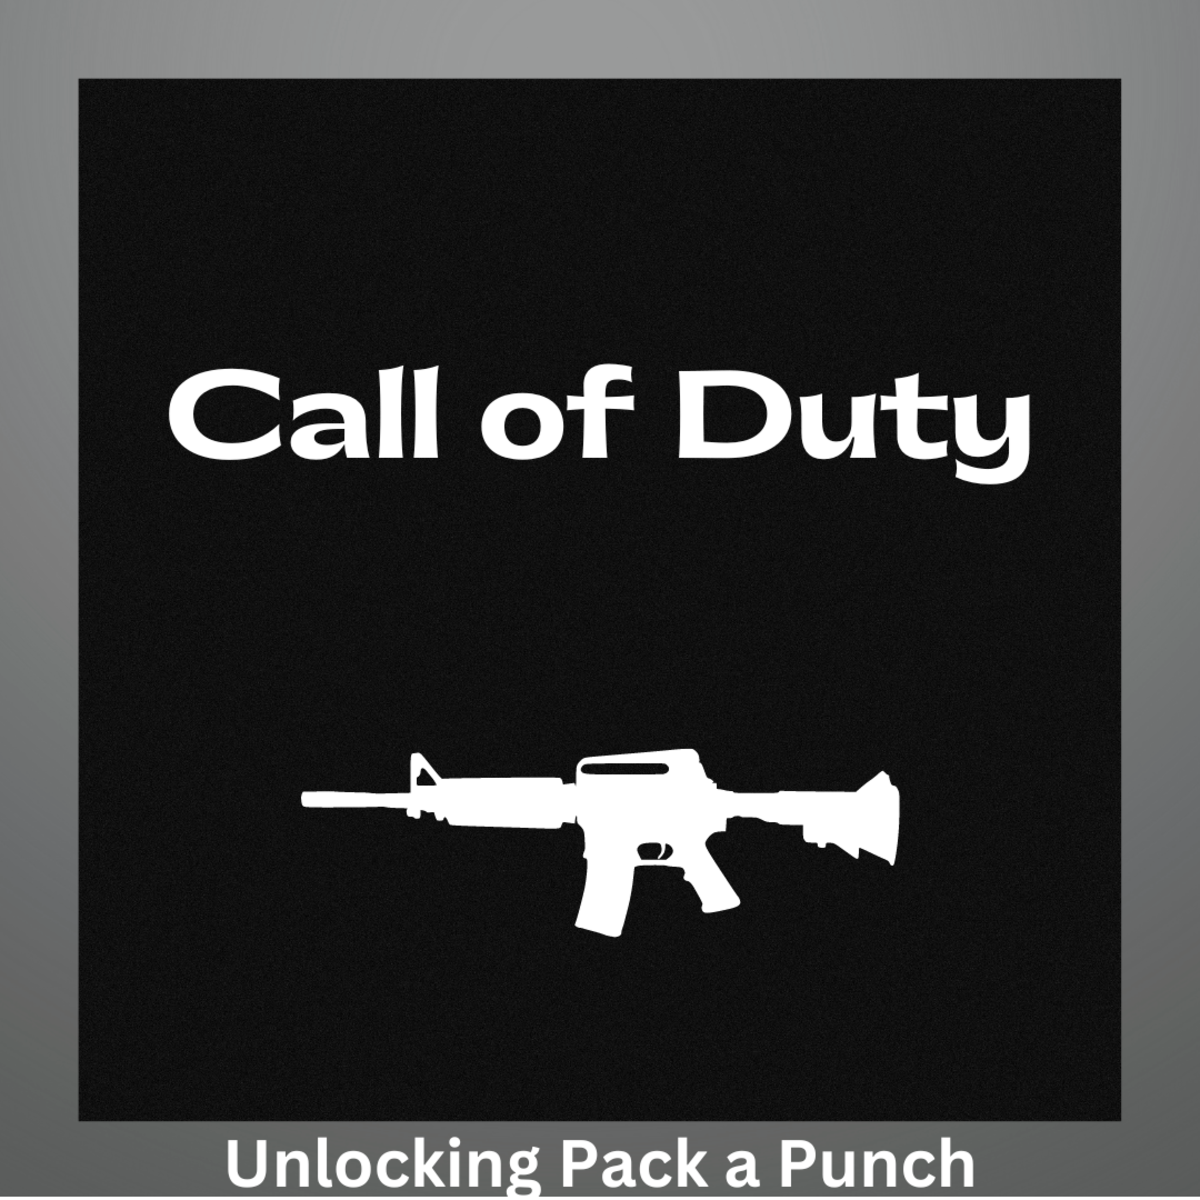 Groesten Haus Zombies How to Unlock Pack a Punch on 